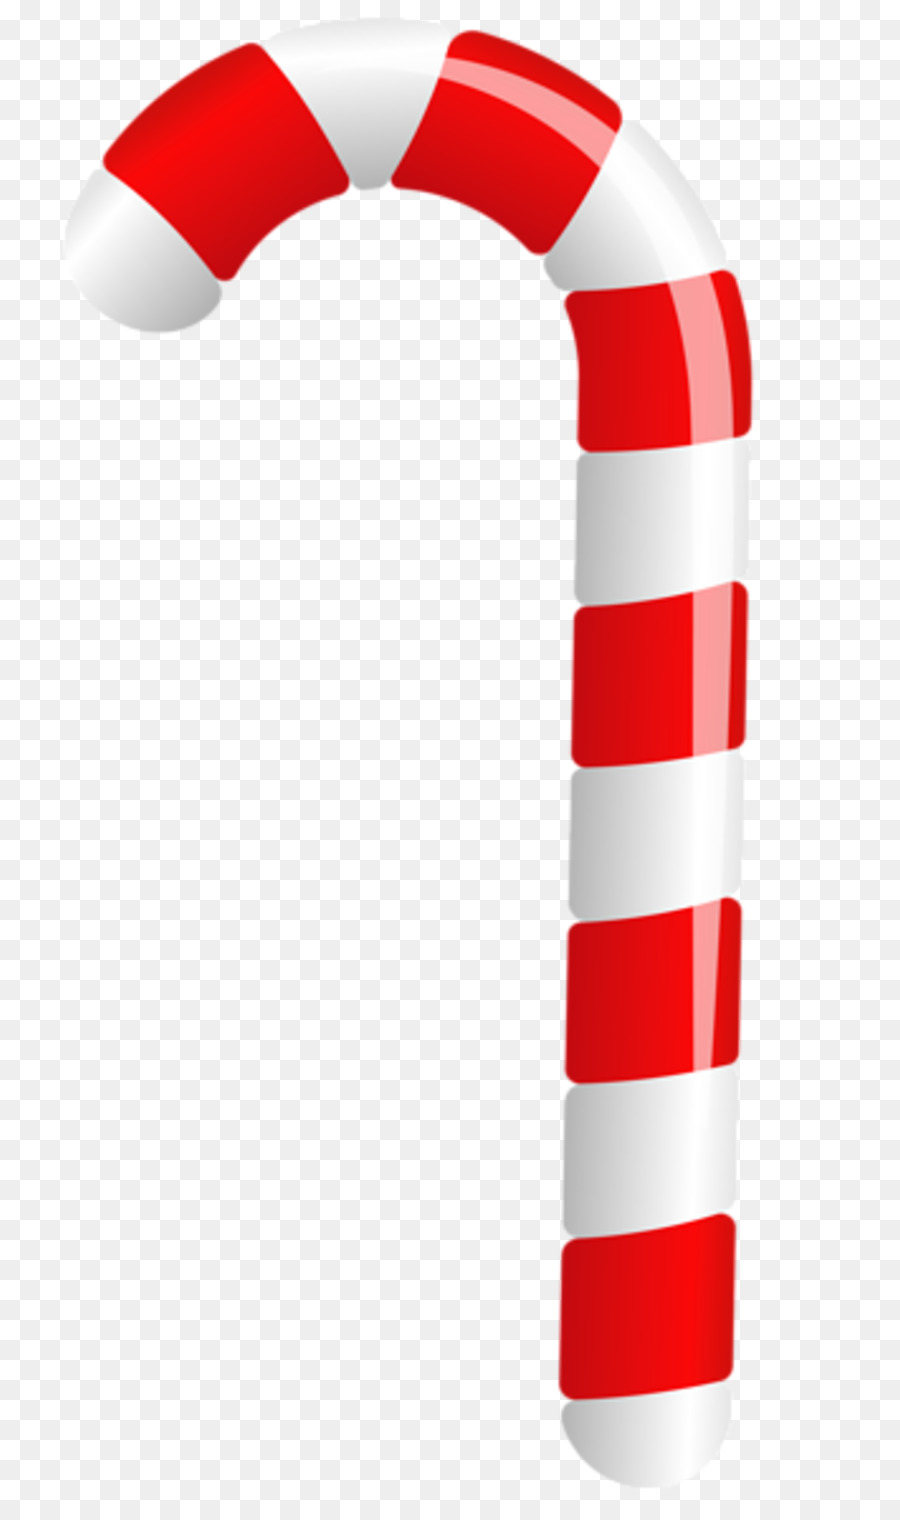 Candy cane Christmas T-shirt New Year - cane png download - 800*1518 - Free Transparent Candy Cane png Download.